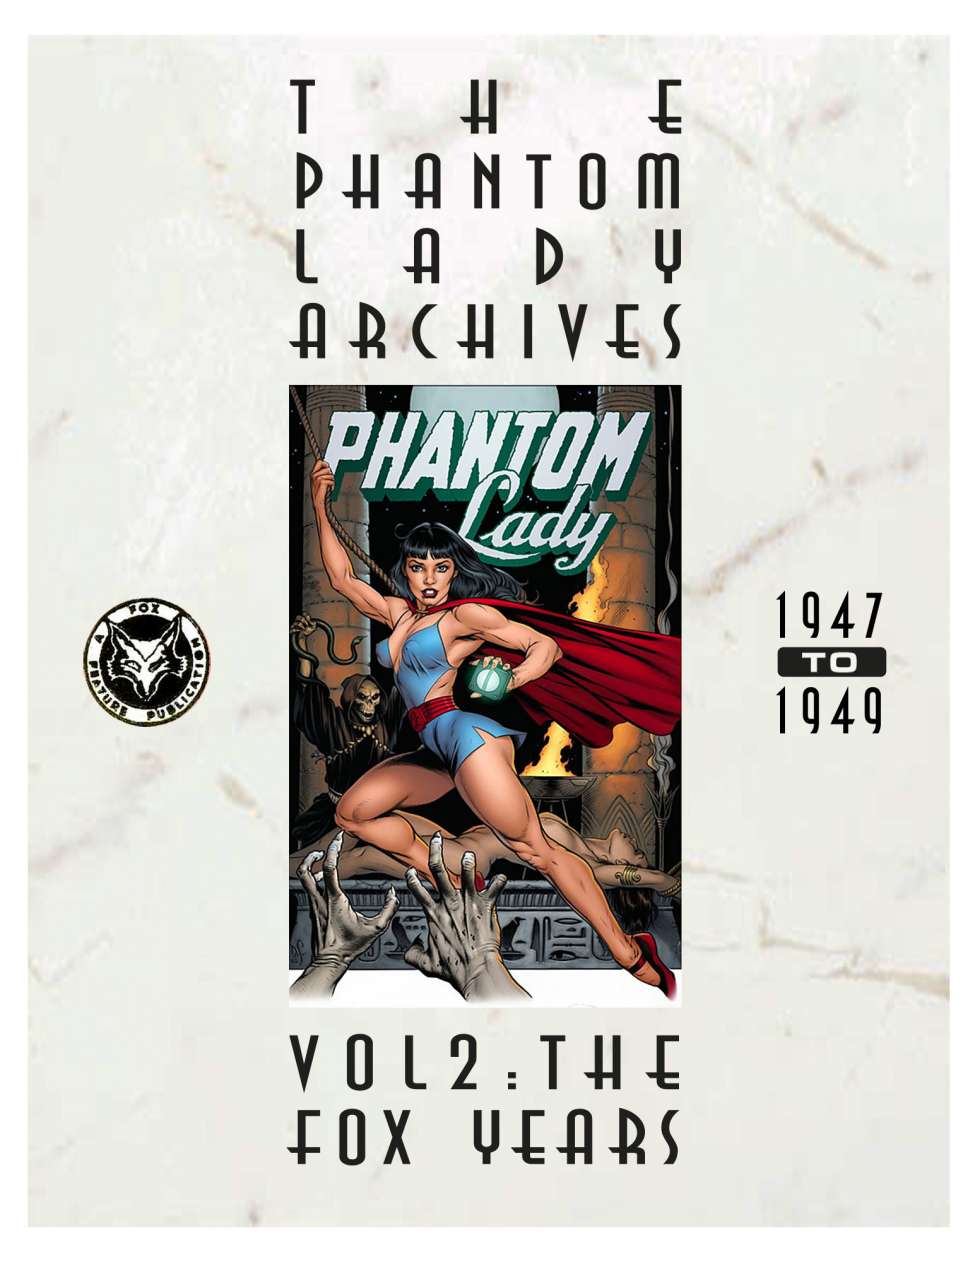 Comic Book Cover For Phantom Lady Archives v2.4 - The Fox Years extras